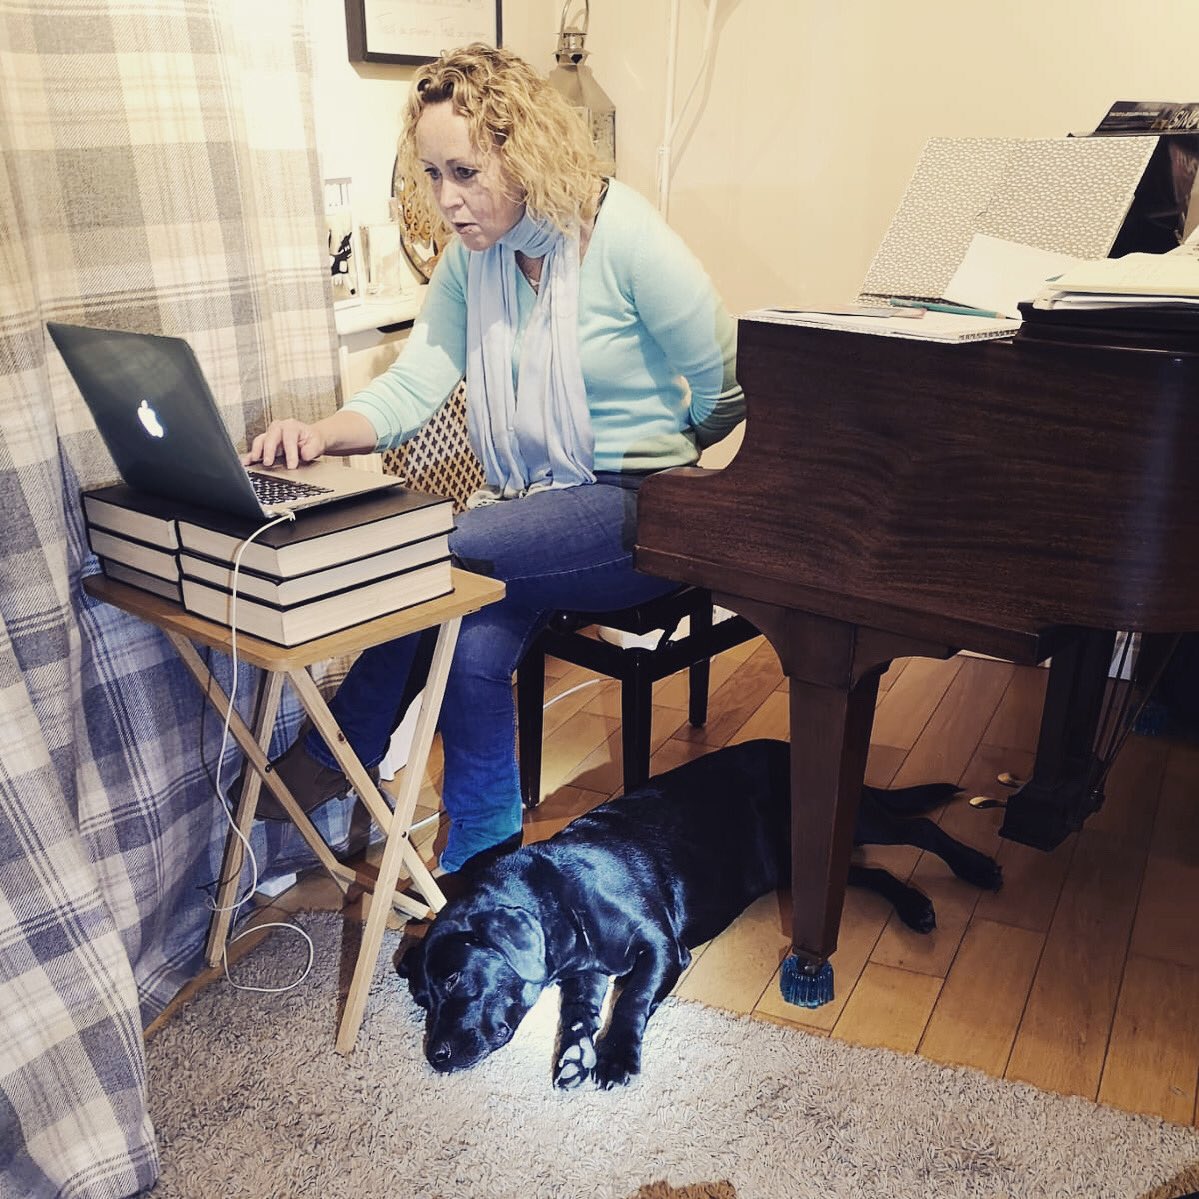 Teaching online singing lessons from@home with the comfort of Sam my singing Labrador! Missing his cuddles from students #singinglabrador #onlinesinginglessons @powerofsinging #pianolessonsonline